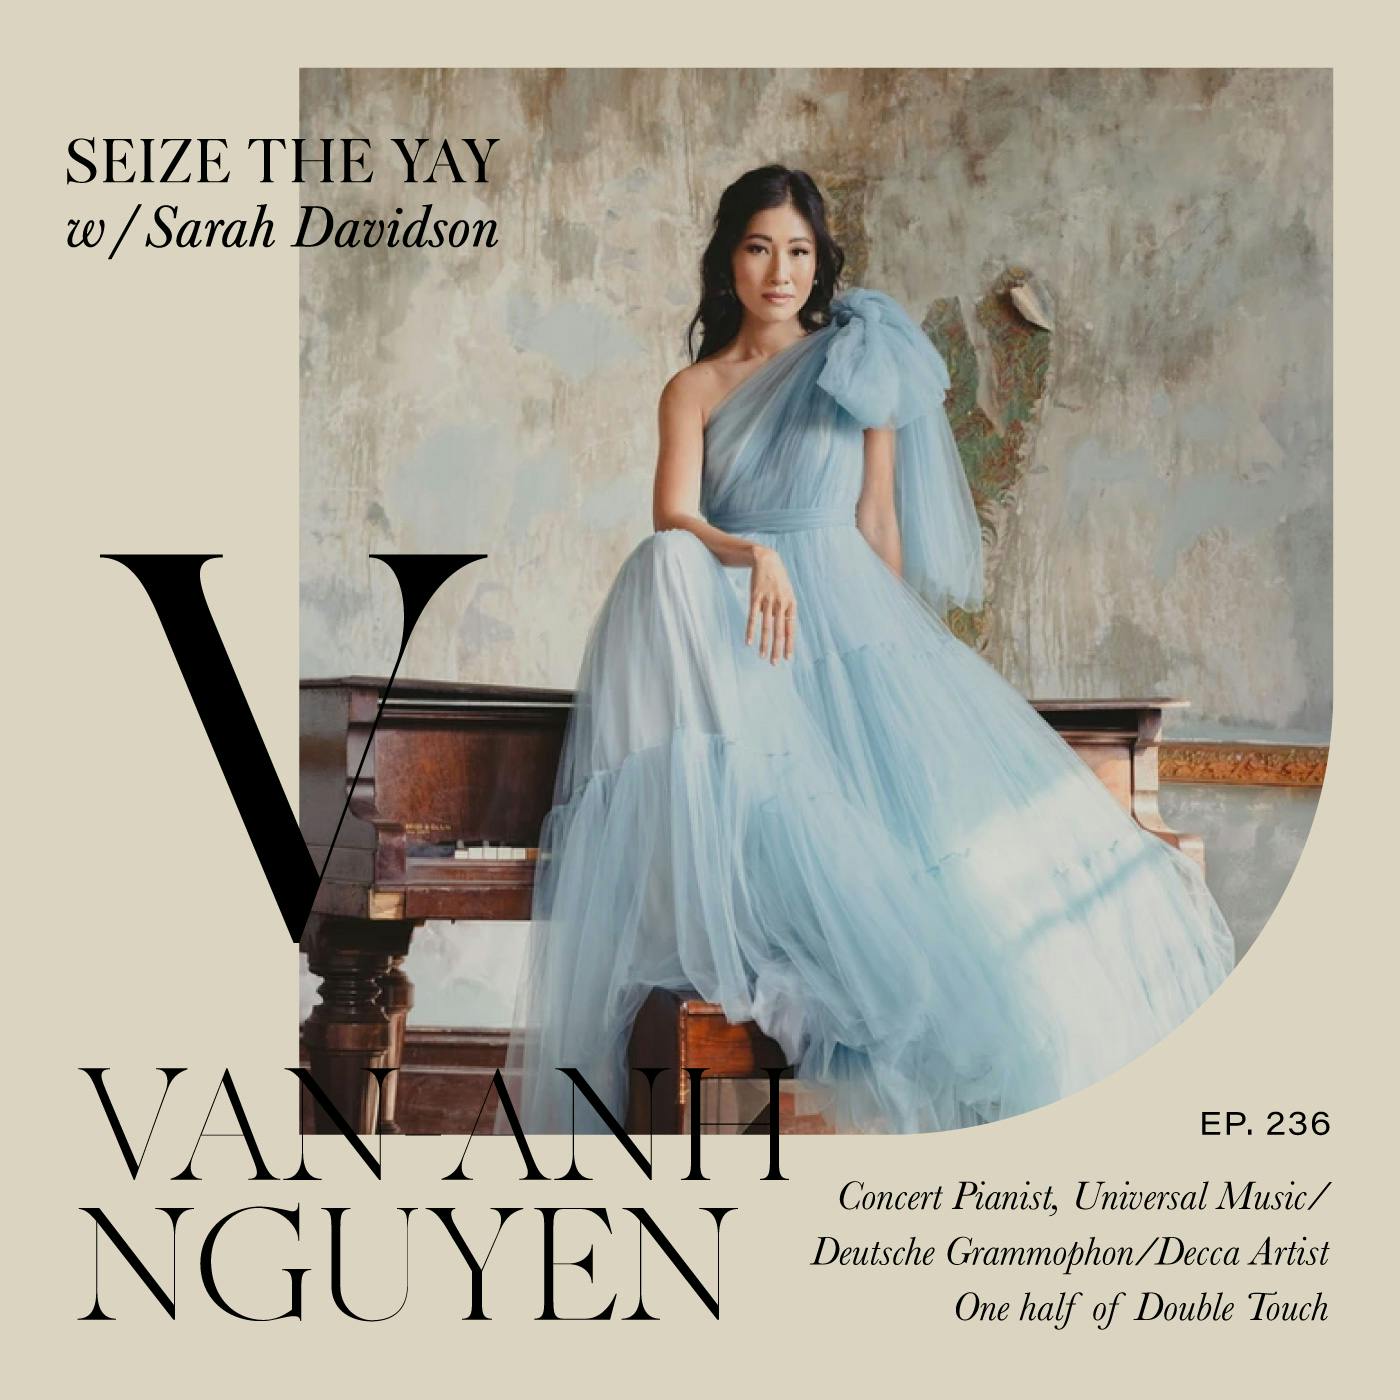 Van-Anh Nguyen // Candlelight concerts, composing and career crescendos!